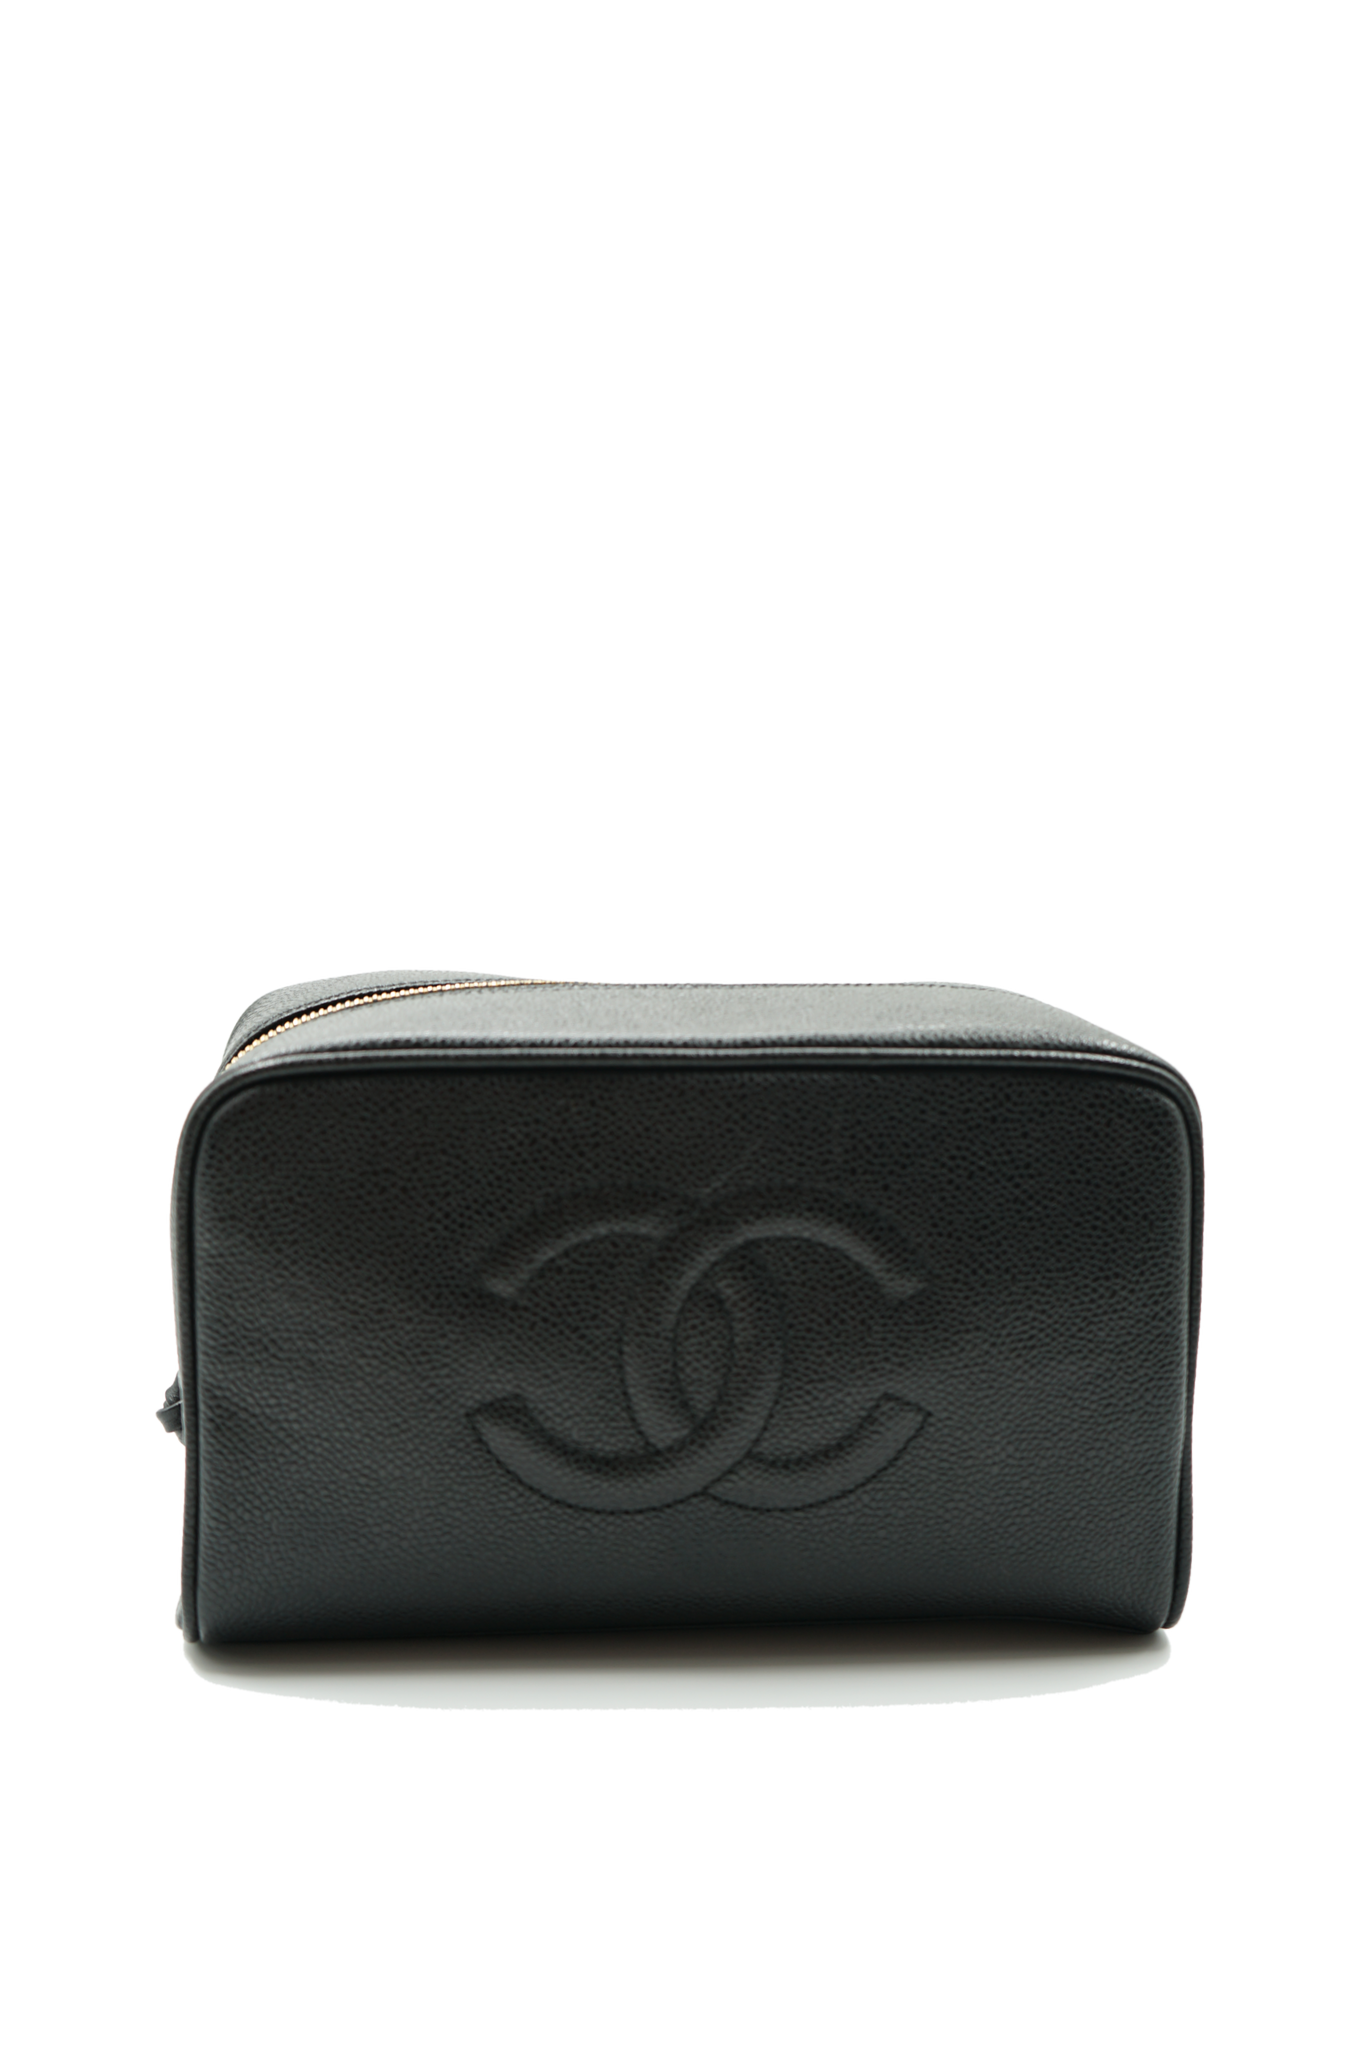 Chanel cosmetic bag in black caviar leather